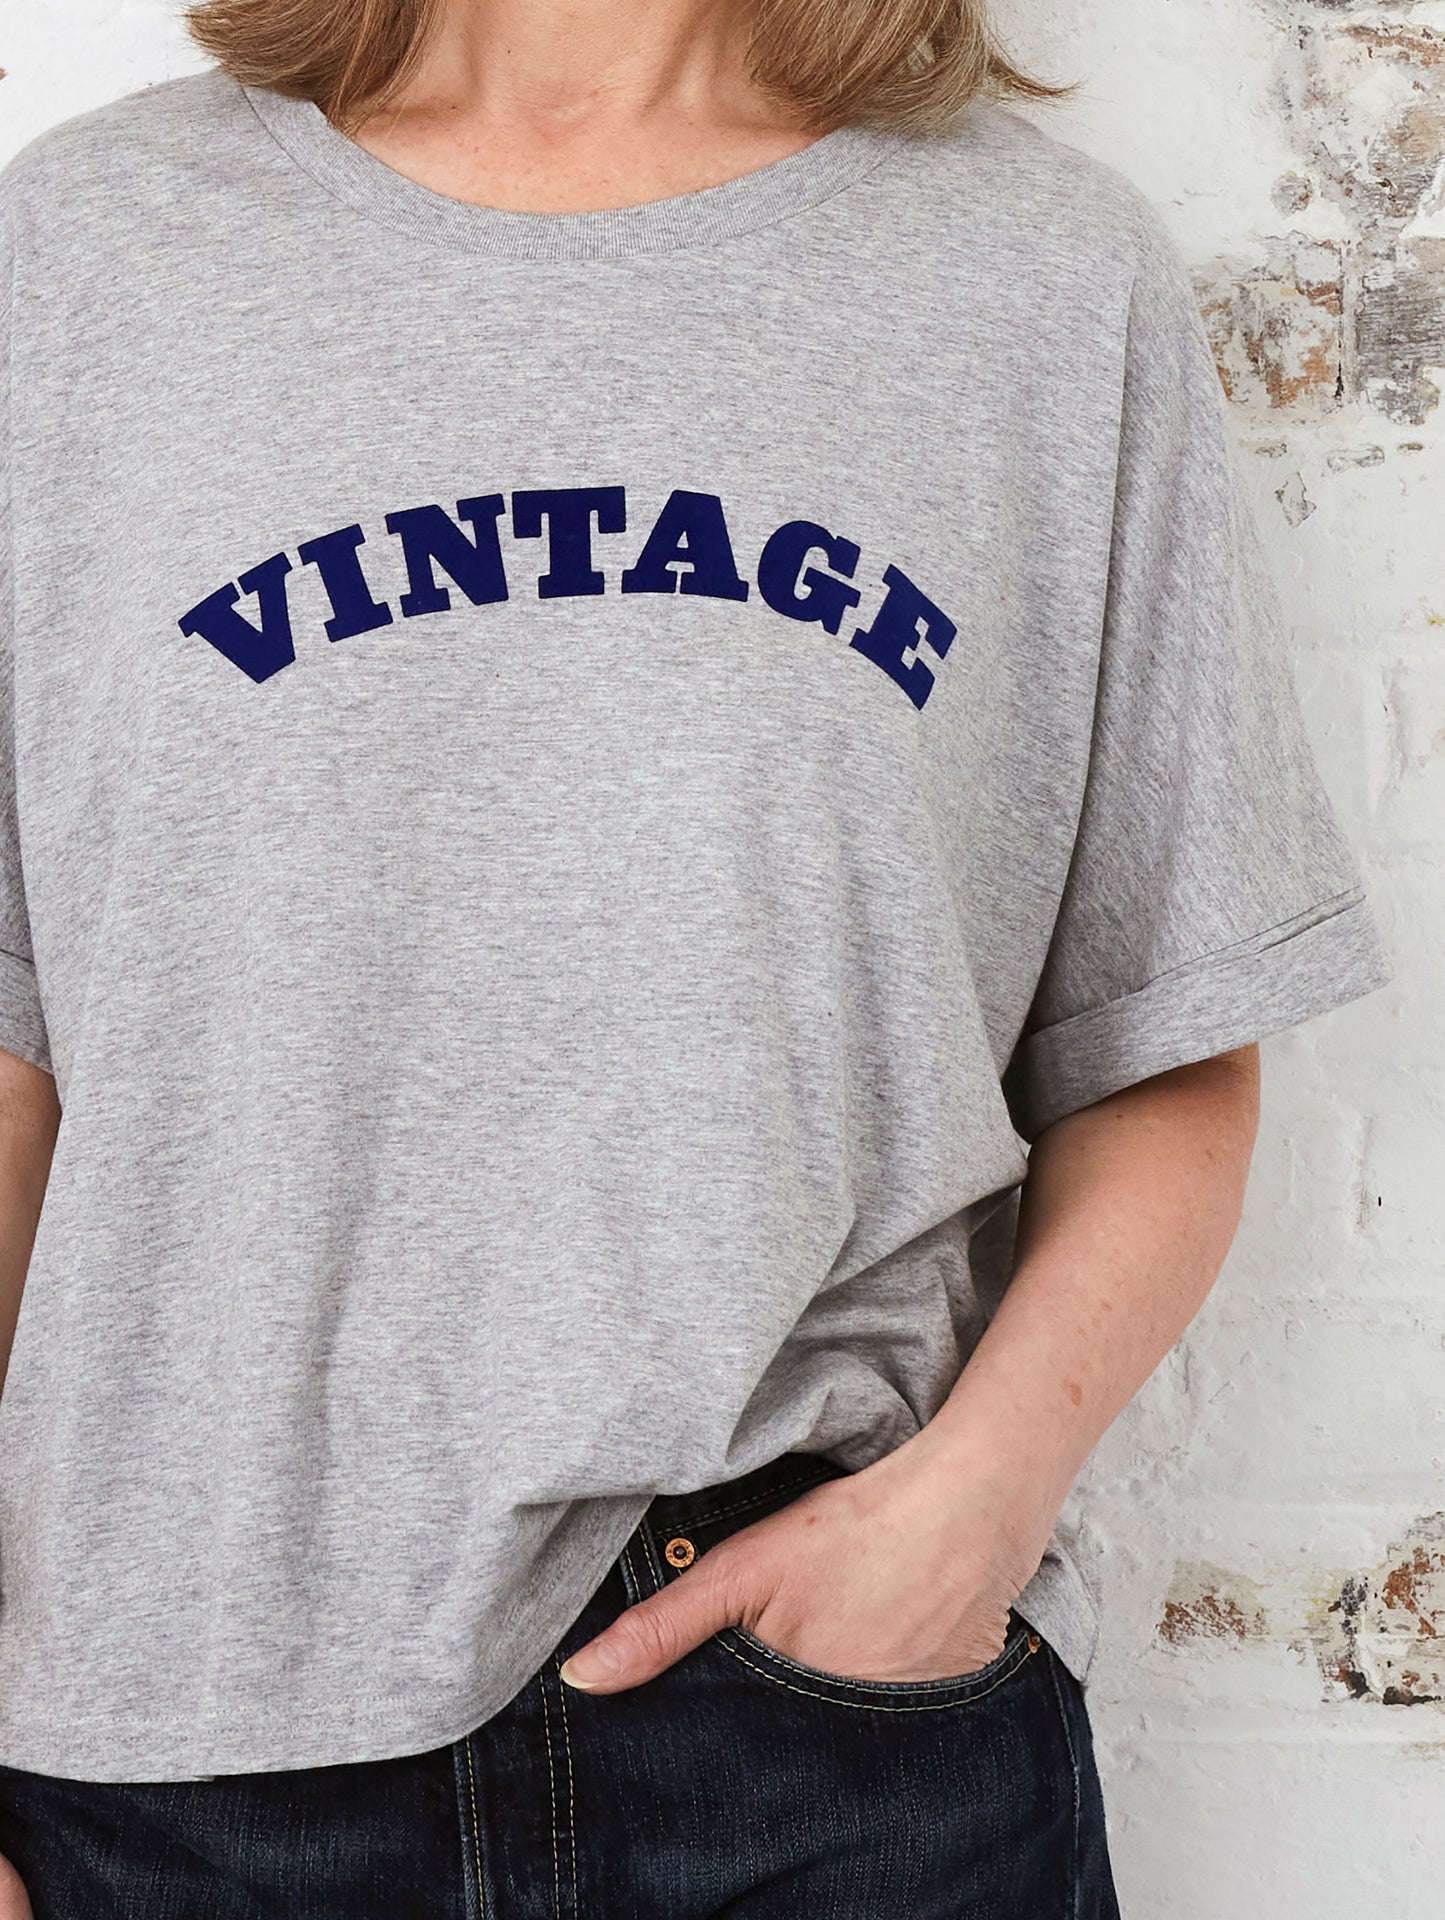 Vintage in navy flock on grey marl relaxed fit organic cotton t-shirt